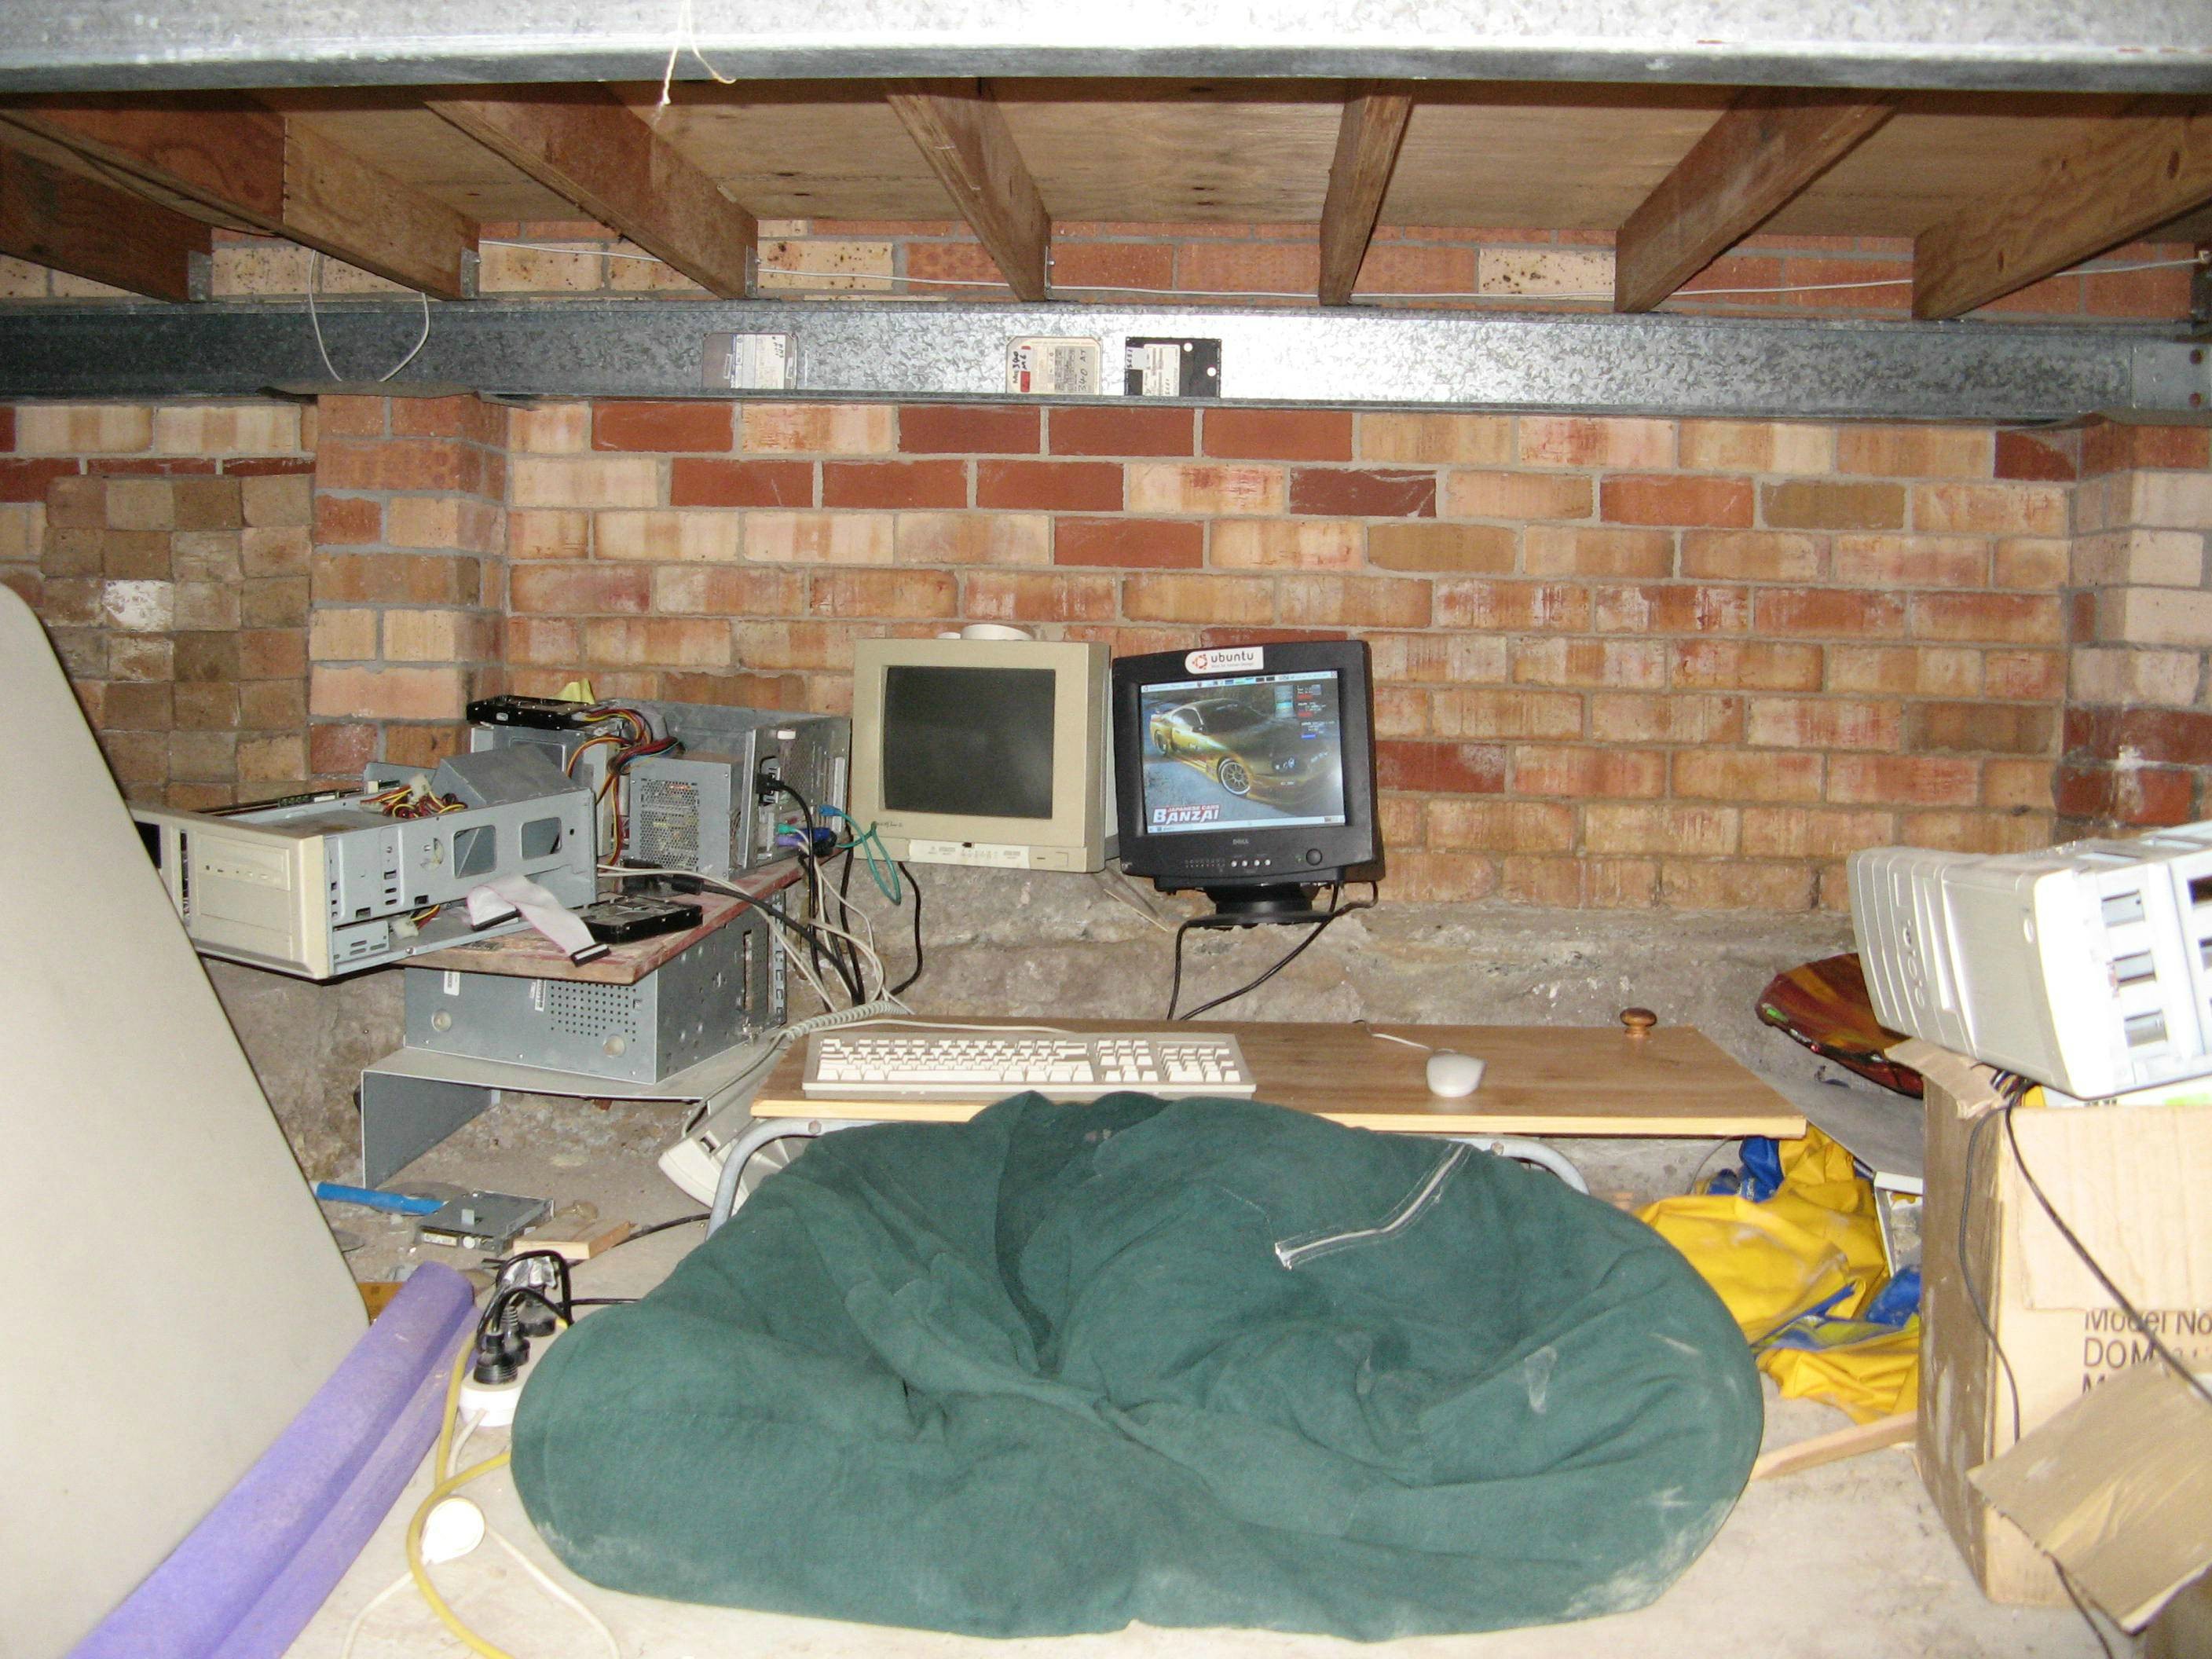 sad and disgusting gamer rigs - grossest rooms - Eee Mono Don